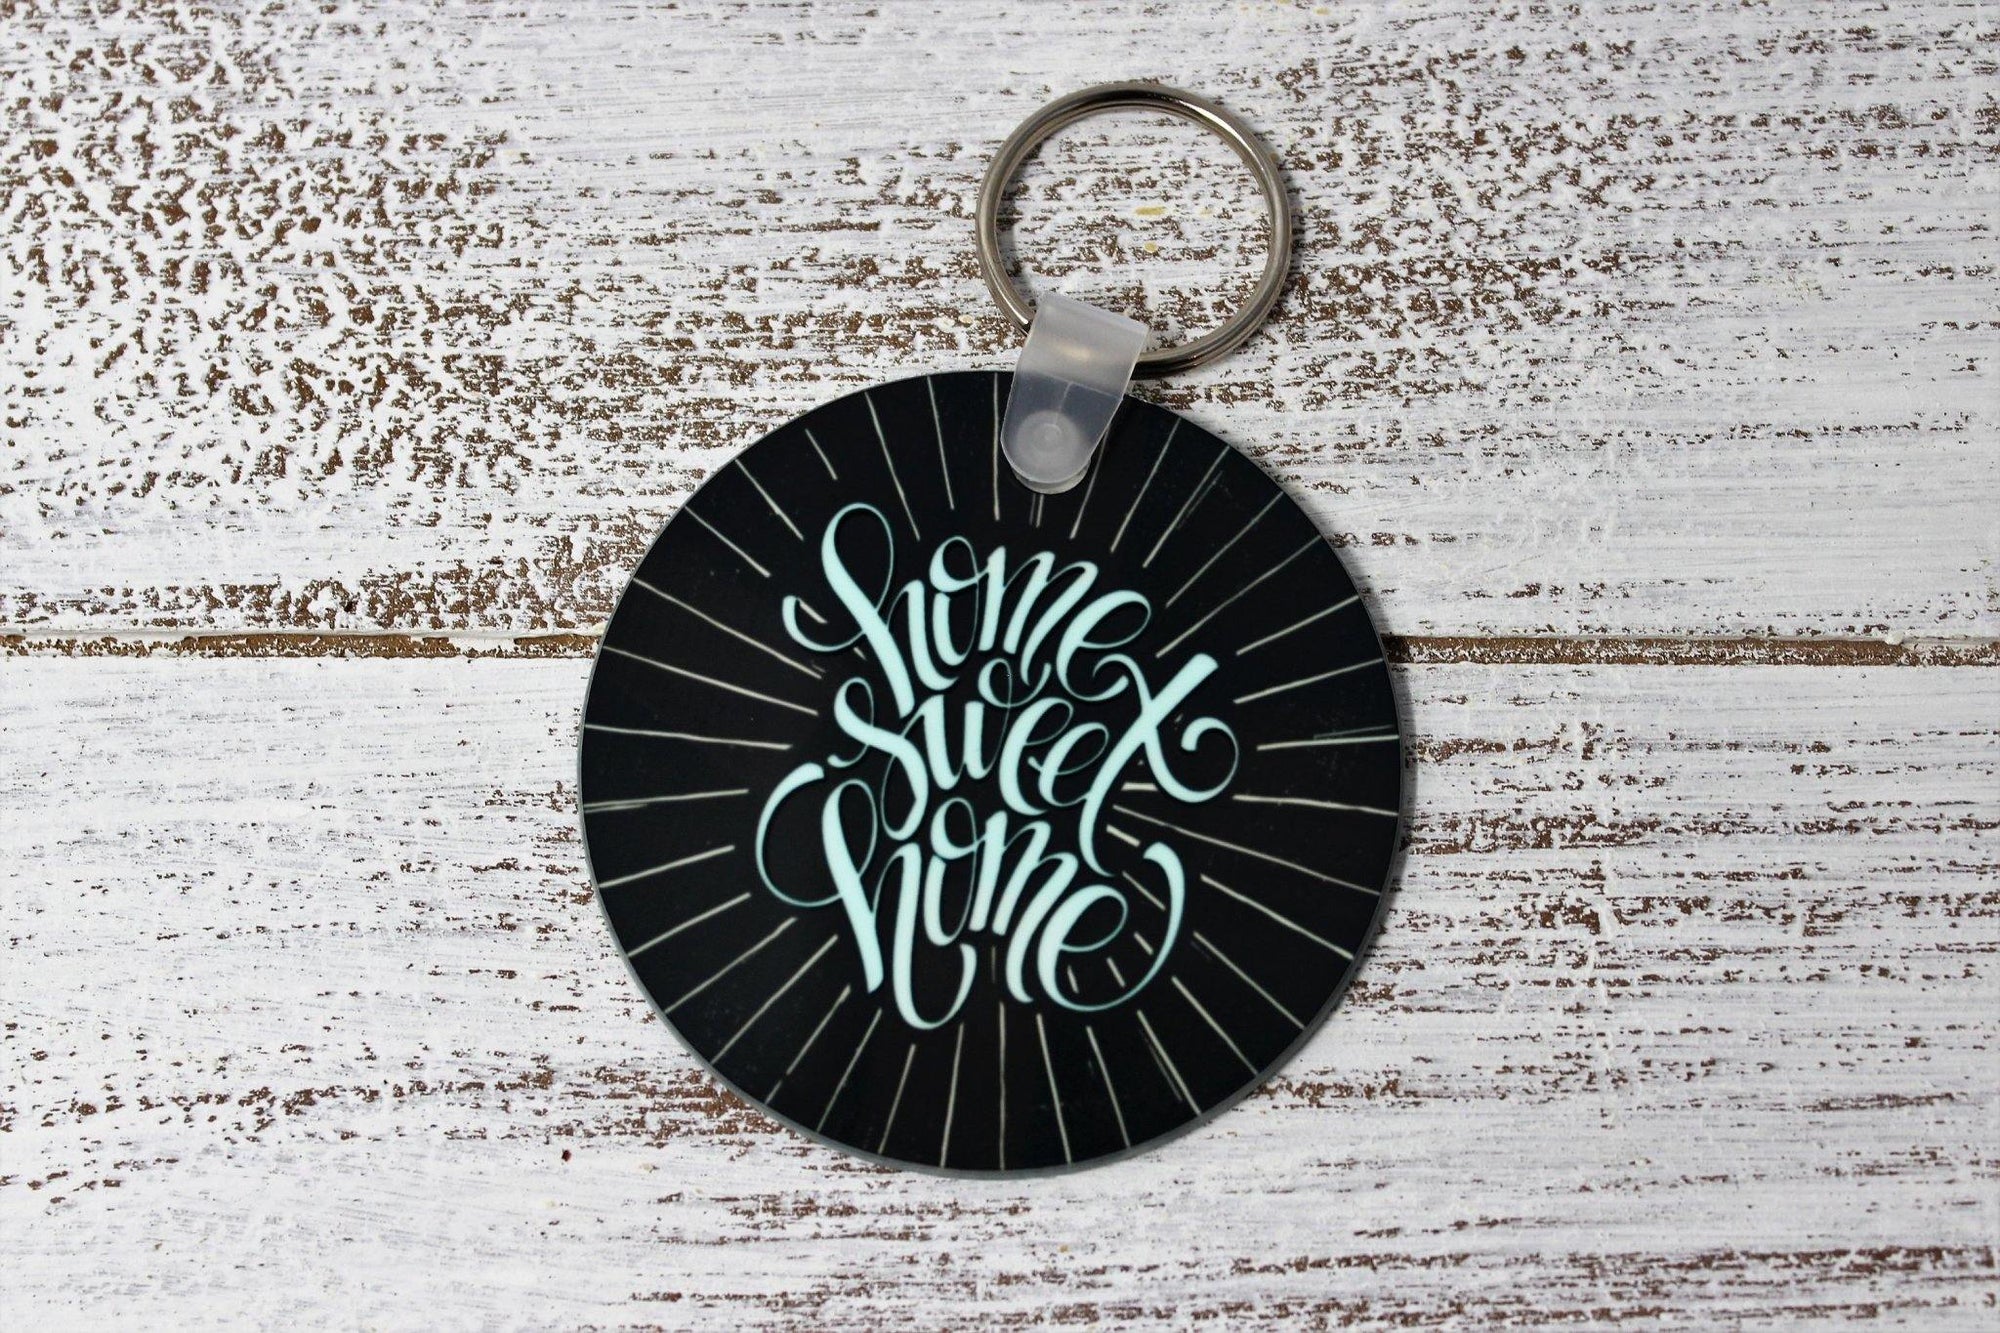 Monogrammed Key Chain | Personalized Key Chain | Home Sweet Home - This & That Solutions - Monogrammed Key Chain | Personalized Key Chain | Home Sweet Home - Personalized Gifts & Custom Home Decor